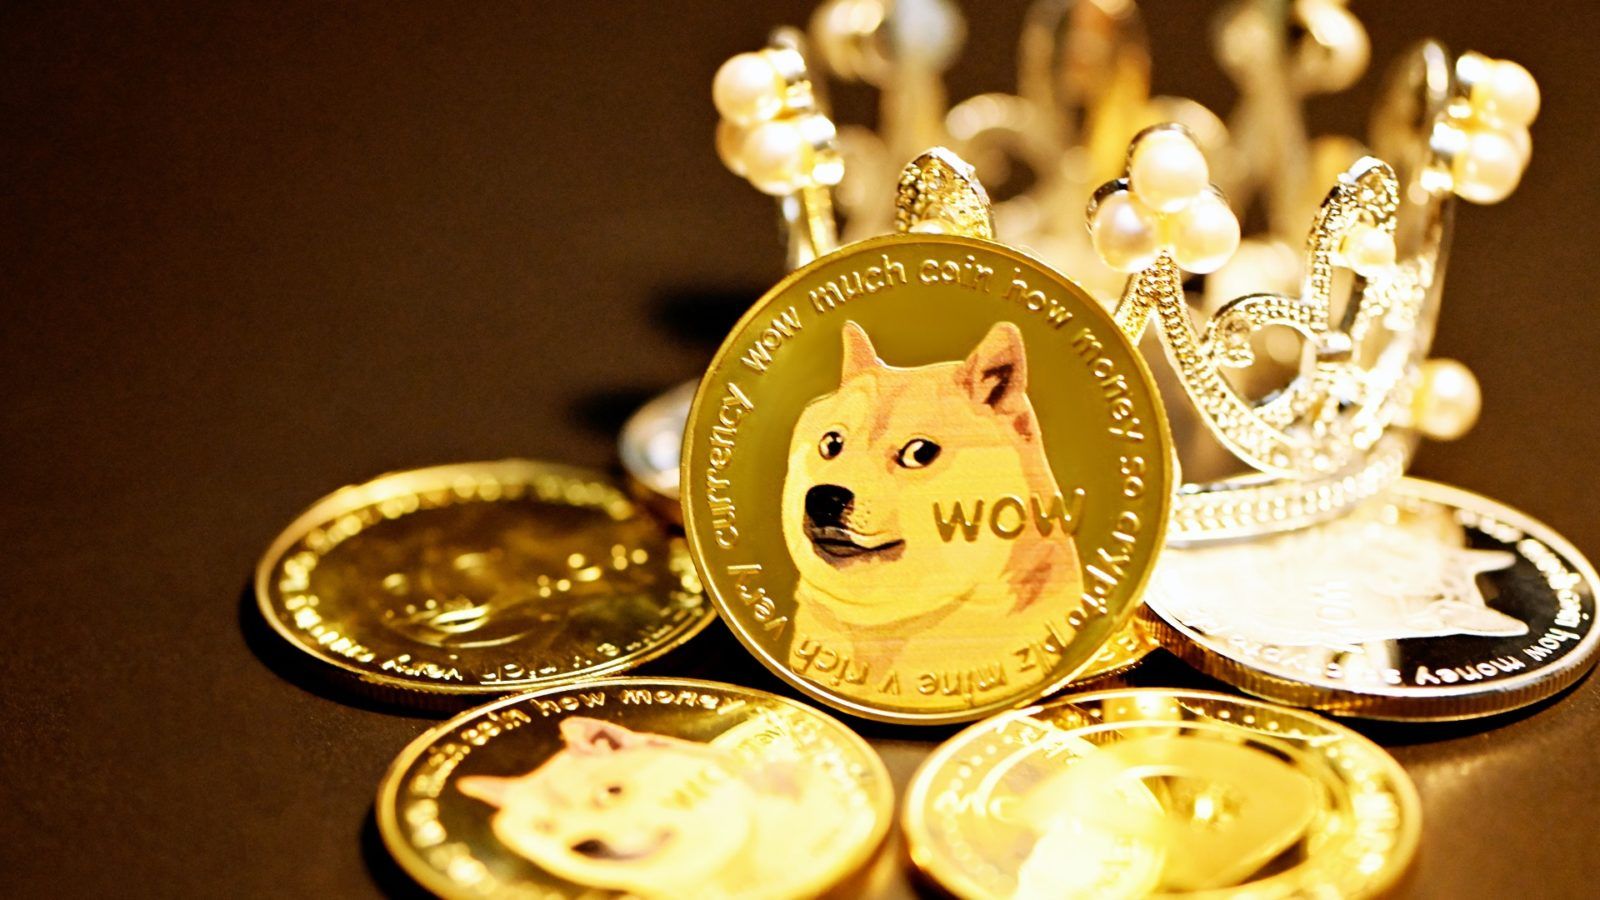 Tesla is accepting Dogecoin as payment option for some merchandise